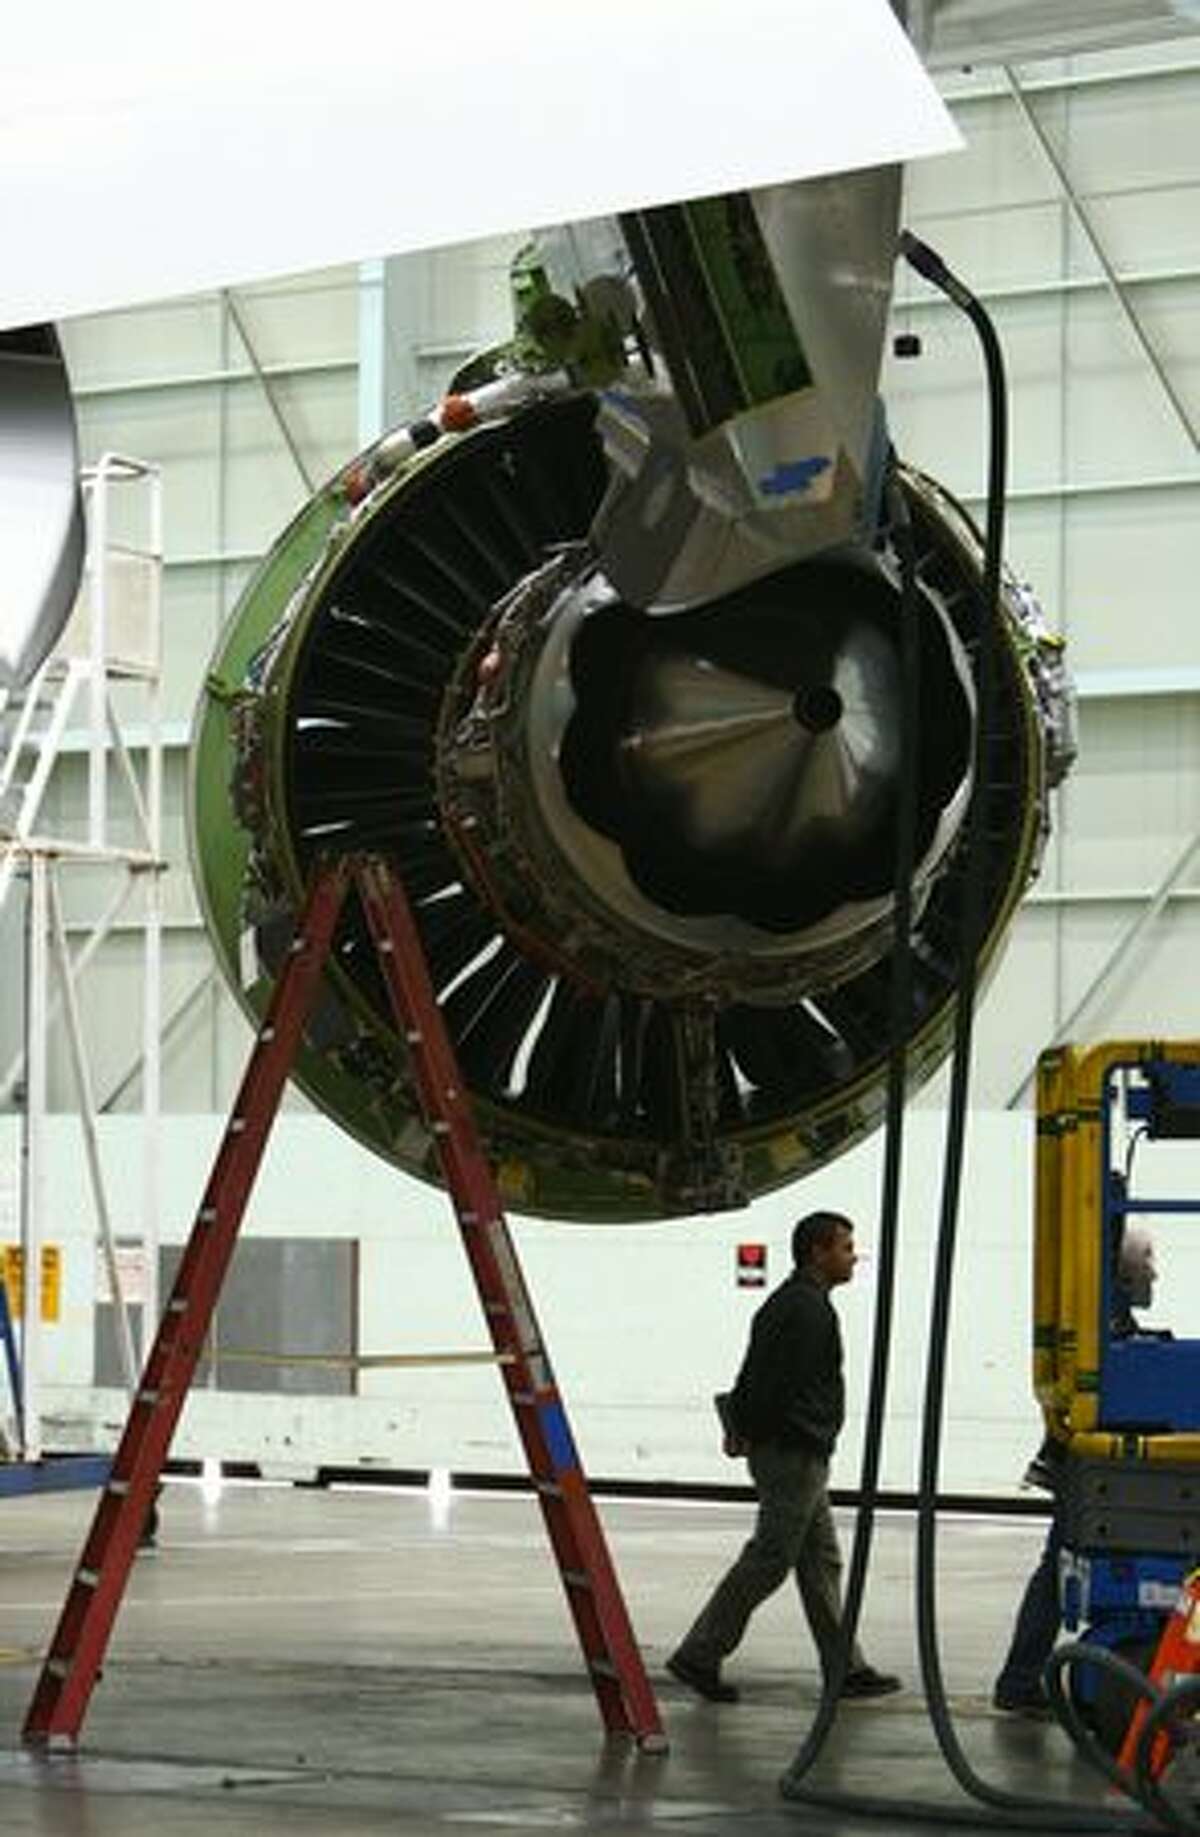 A new GEnx engine is showon on a 747-8 freighter during a tour of the Boeing 747-8 Intercontinental and Freighter assembly line on Saturday, February 12, 2011 at the Boeing plant in Everett.